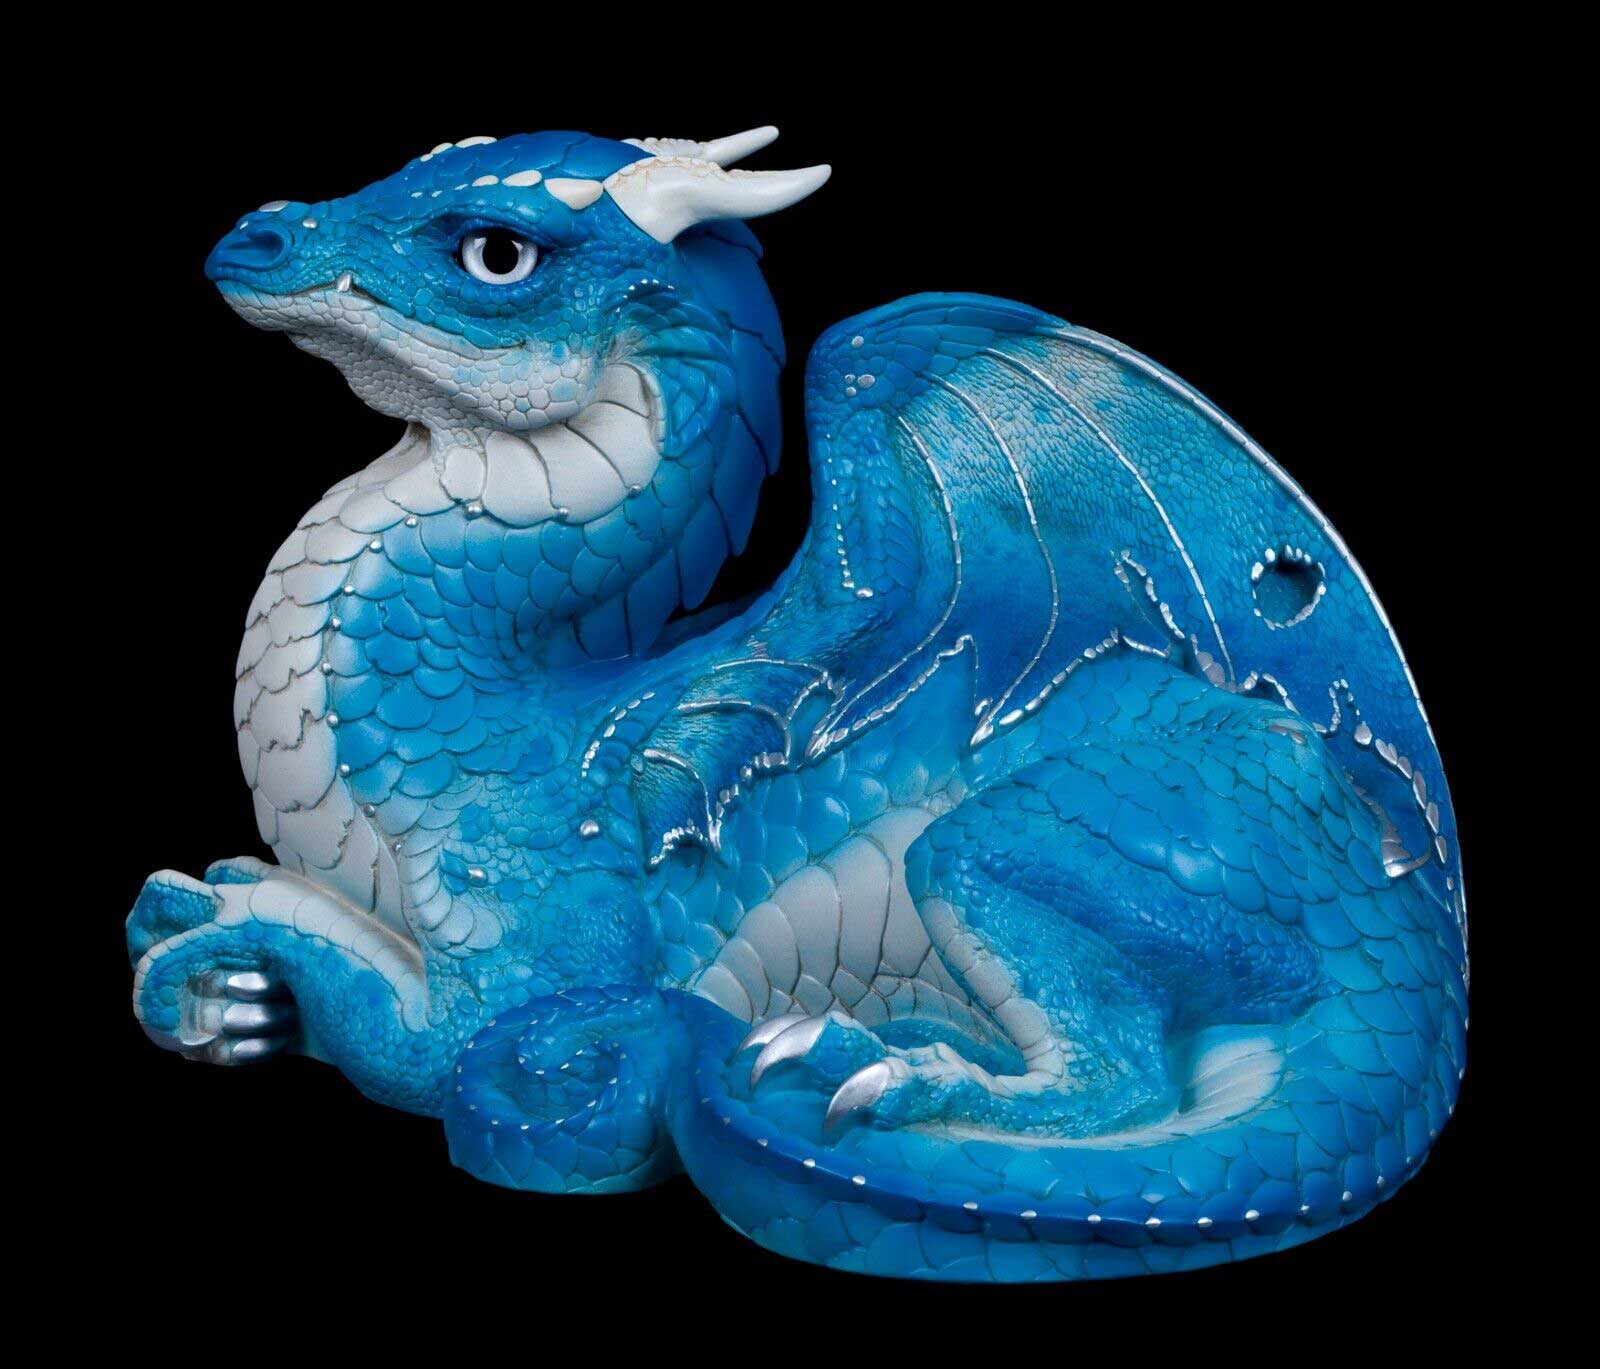 20230220-Cirrus-Old-Warrior-Dragon-Test-Paint-1-by-Gina